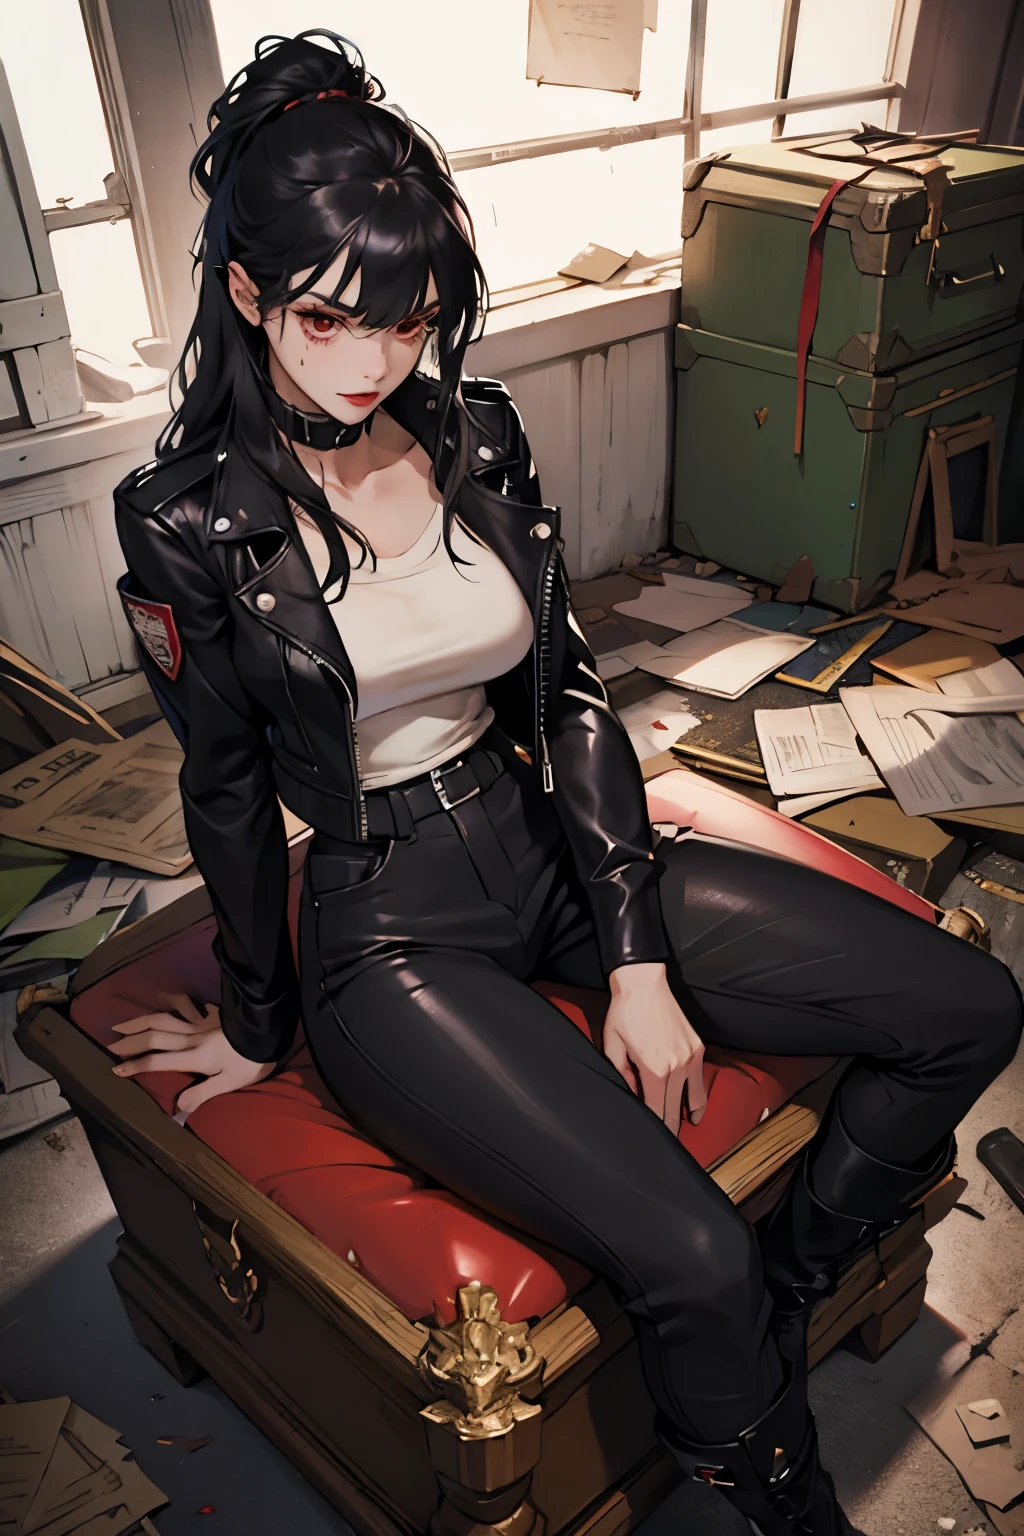 1 vampire girl, long, wavy black hair, red eyes, thin red lips, round face, huge breasts, wearing a dark leather jacket, dark leather tight pants, buccaneer style boots, sitting on top of a coffin in the basement of a abandoned house